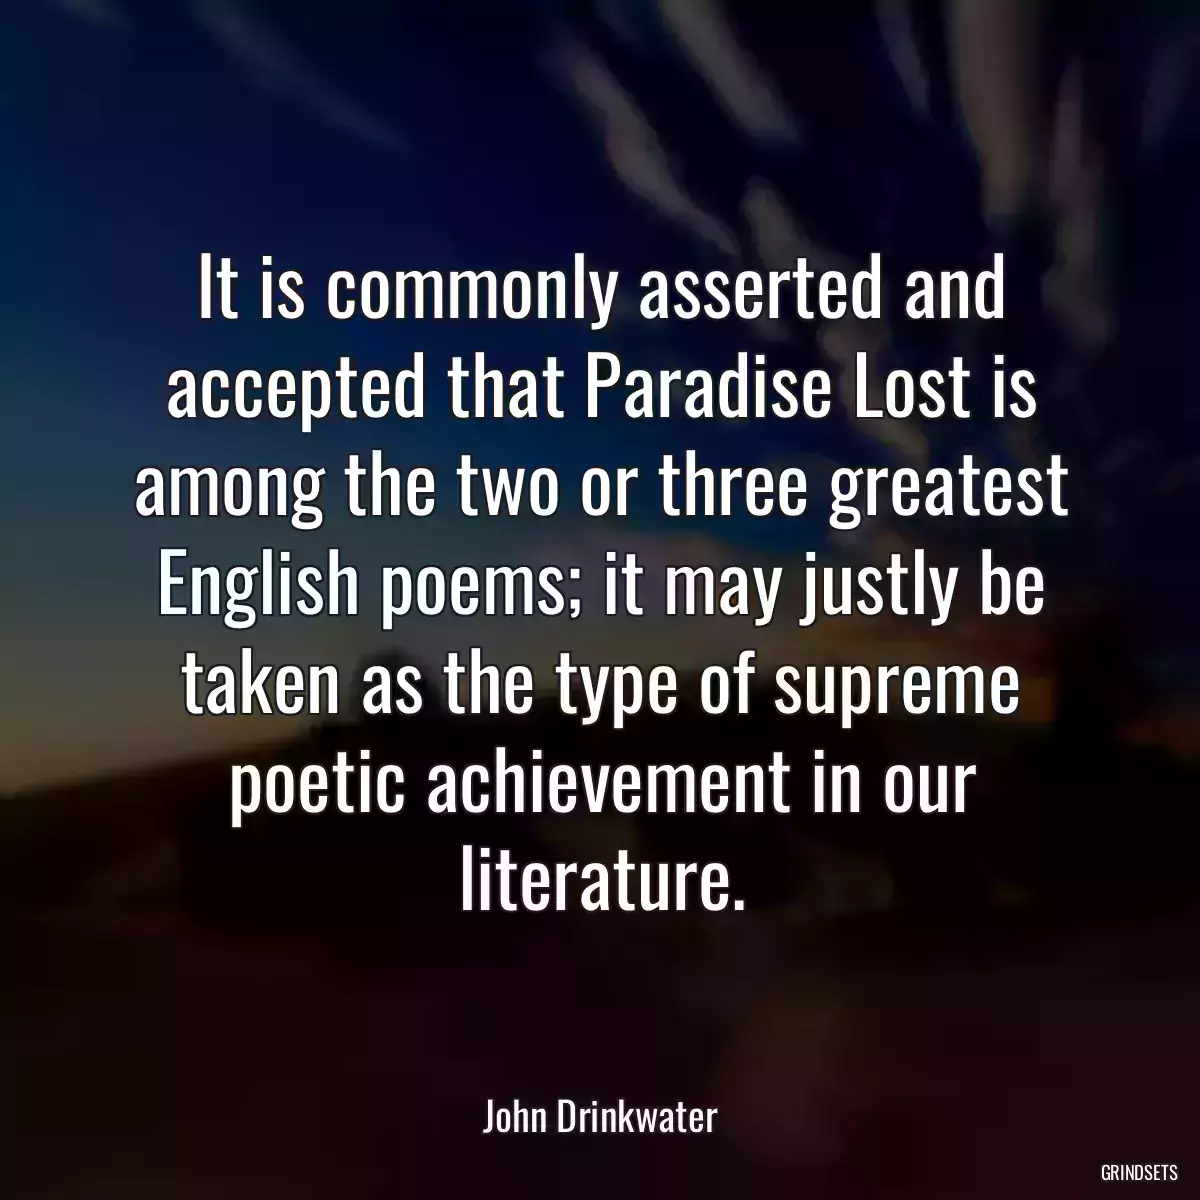 It is commonly asserted and accepted that Paradise Lost is among the two or three greatest English poems; it may justly be taken as the type of supreme poetic achievement in our literature.